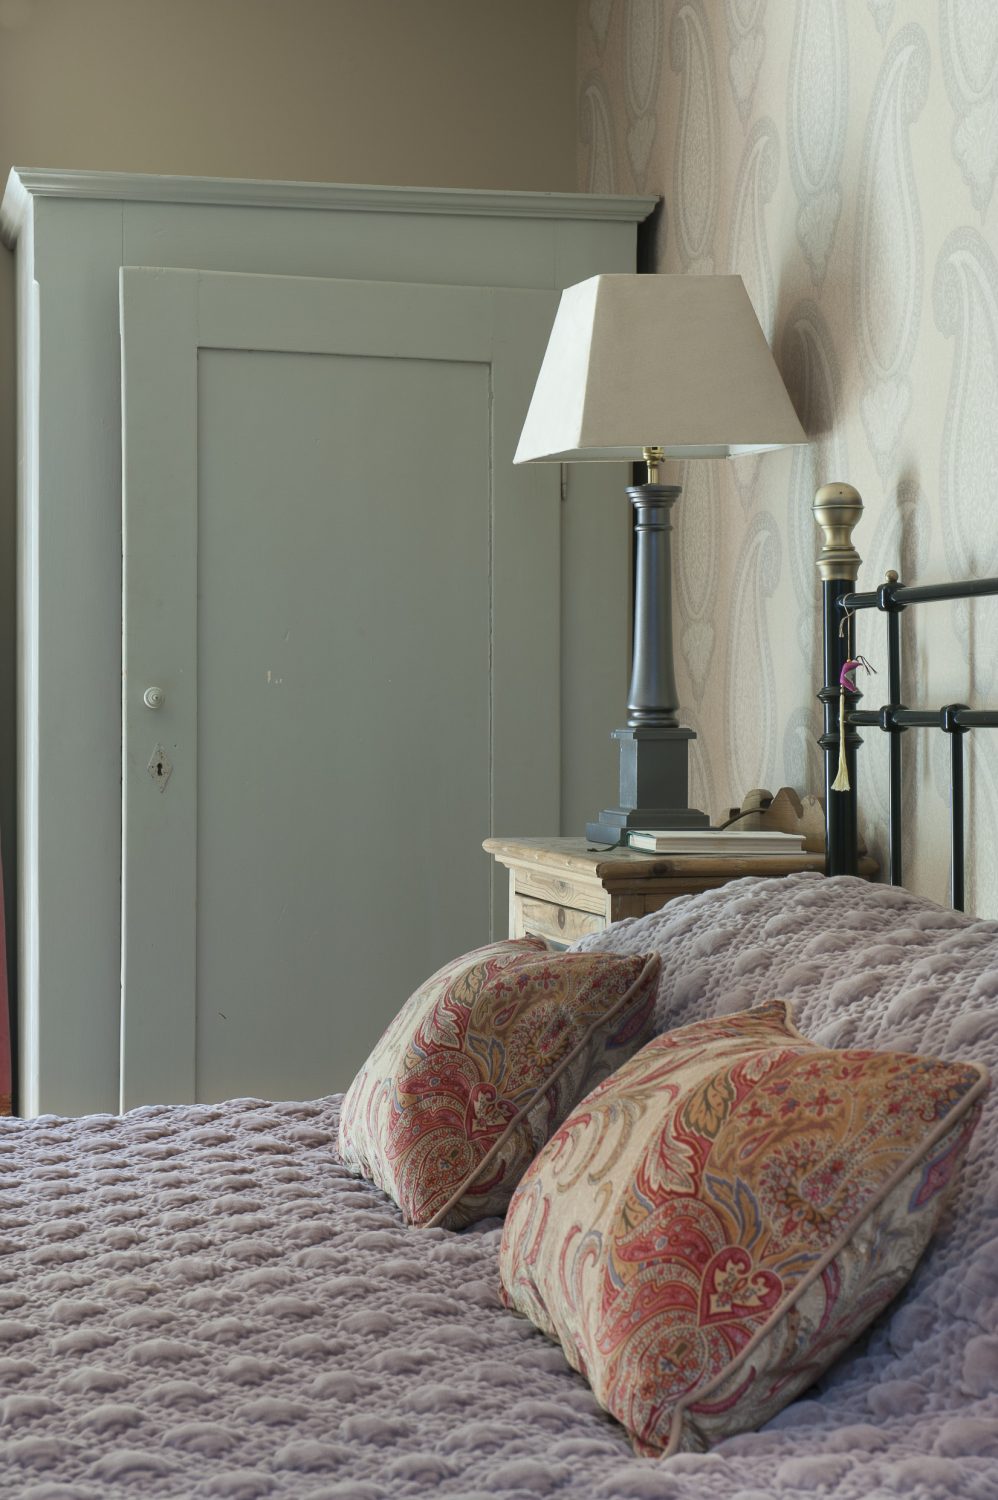 The basement guestroom features a Victorian style brass bedstead and distressed bedside units from Foxhole Antiques